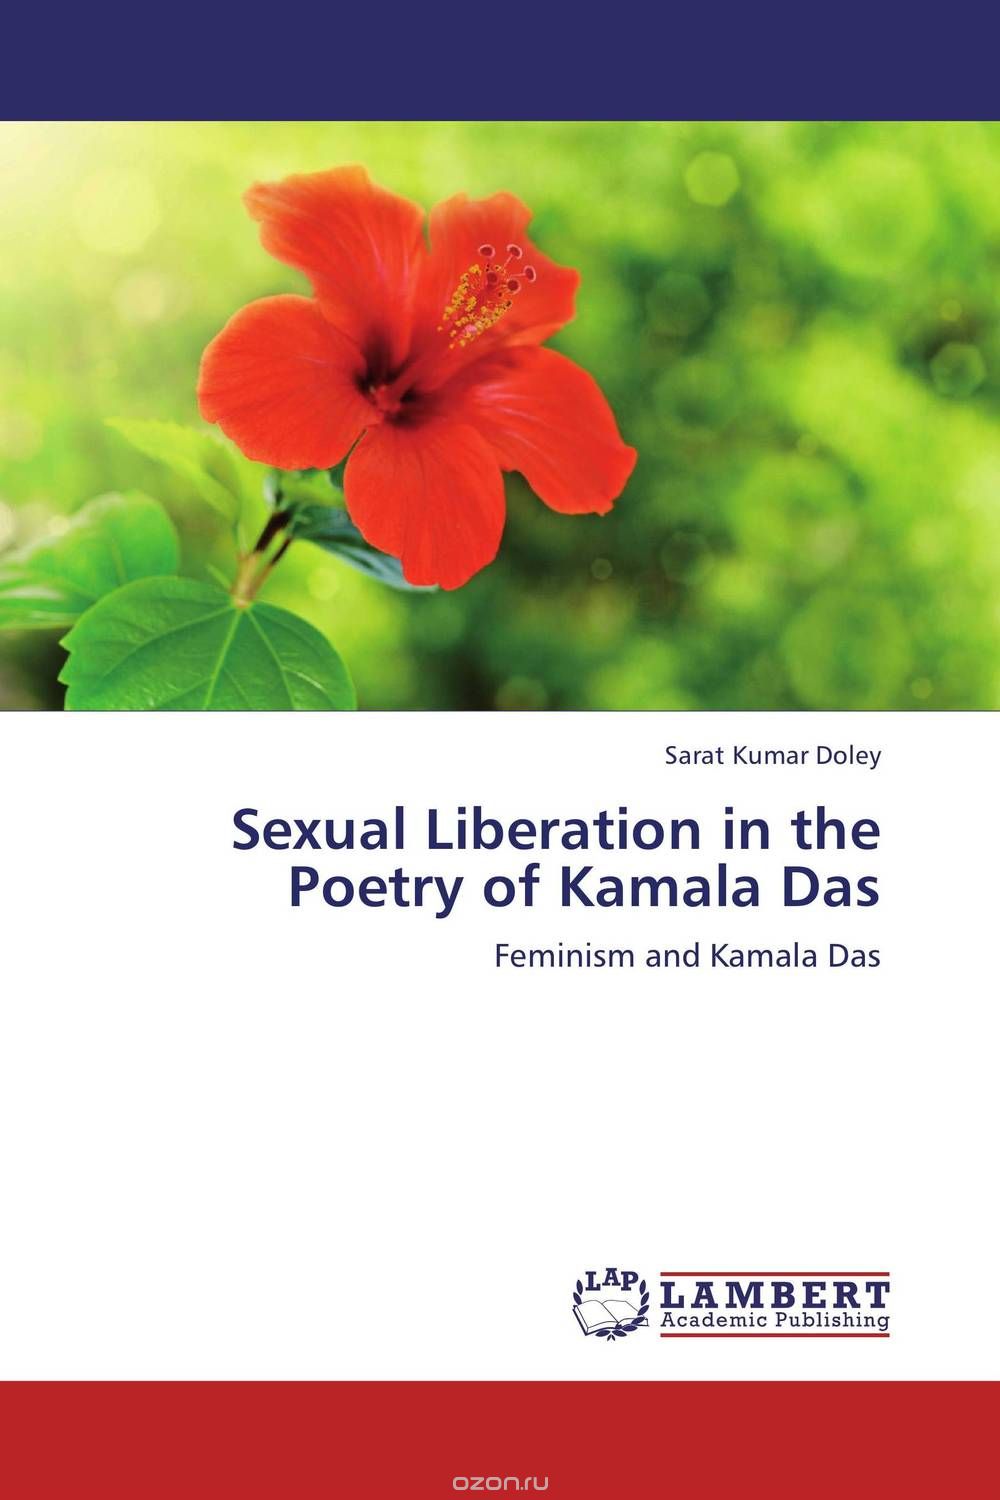 Sexual Liberation in the Poetry of Kamala Das